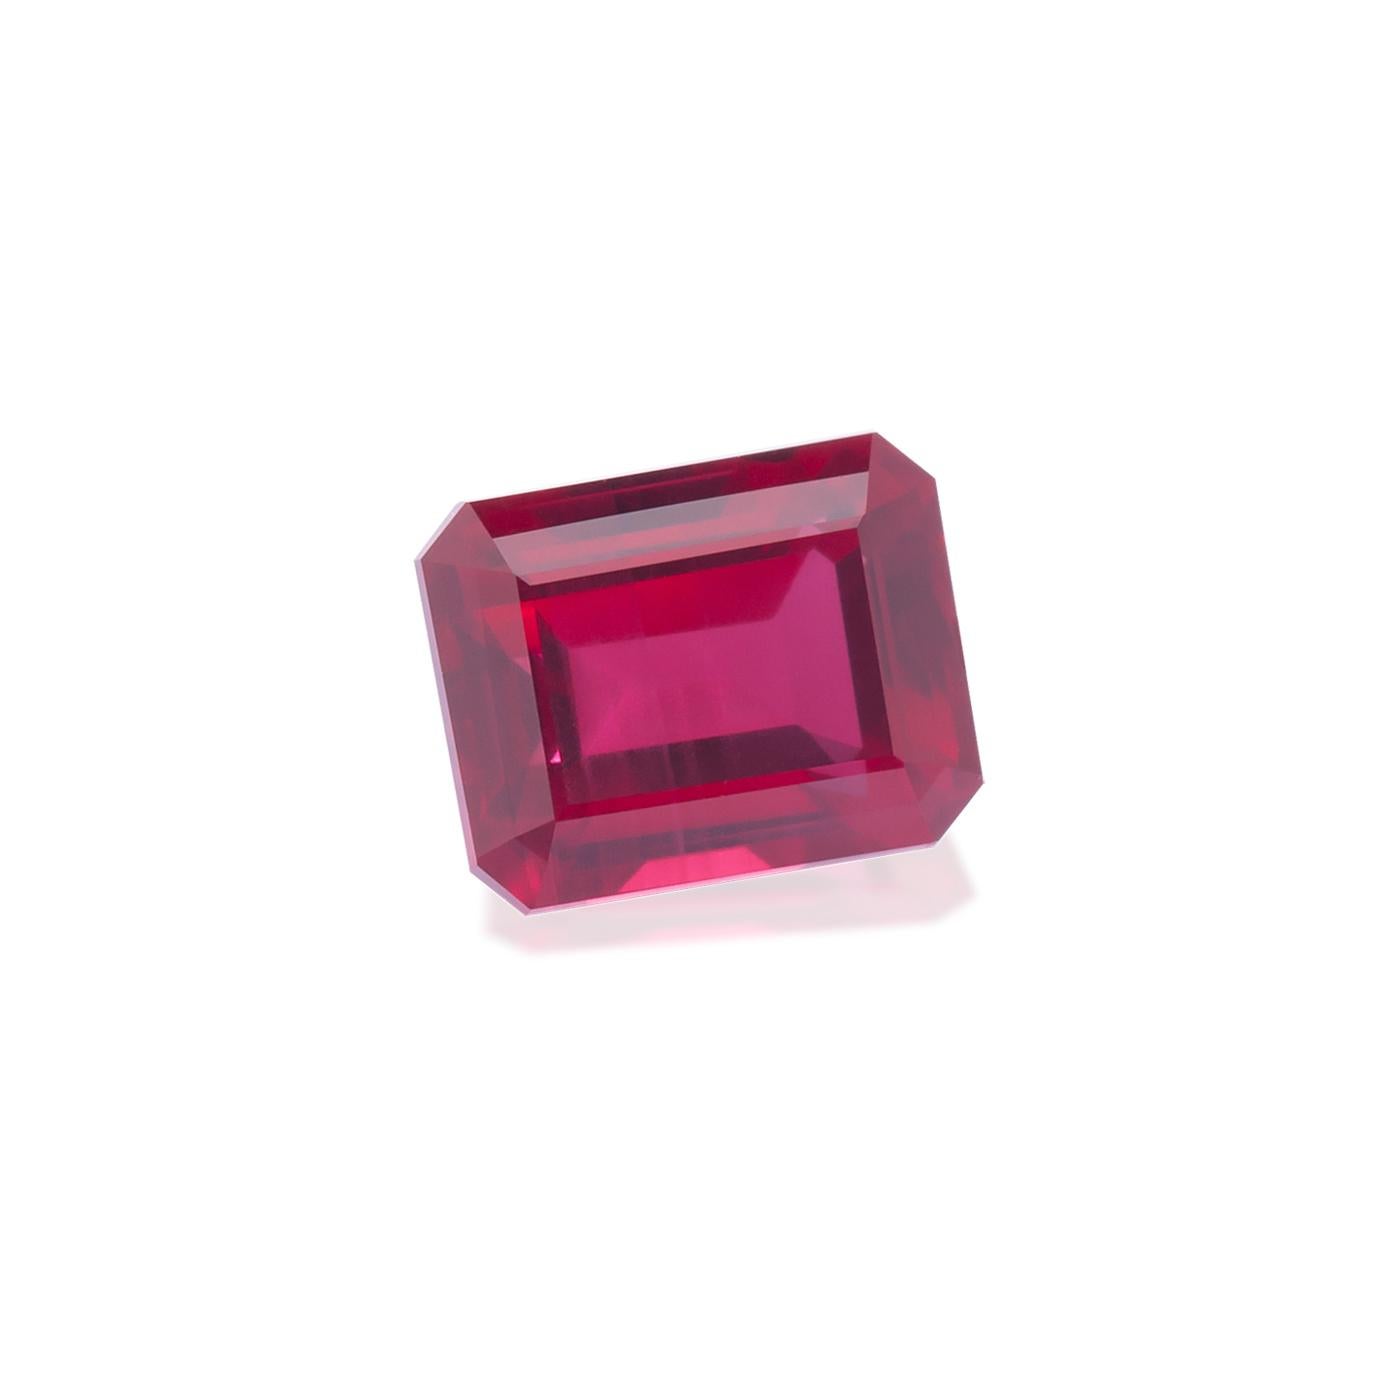 Ruby
Octagon Shape
Color Red
Brilliant/Step Cut
Dimension 4.47x5.68x3.42
Weight 1.008 cts.
Country of Origin Mozambique

GEM RARITY: UNEARTHLY THE RAREST GEM

Witness the unique journey of colored gemstones, experience a new level of iconic